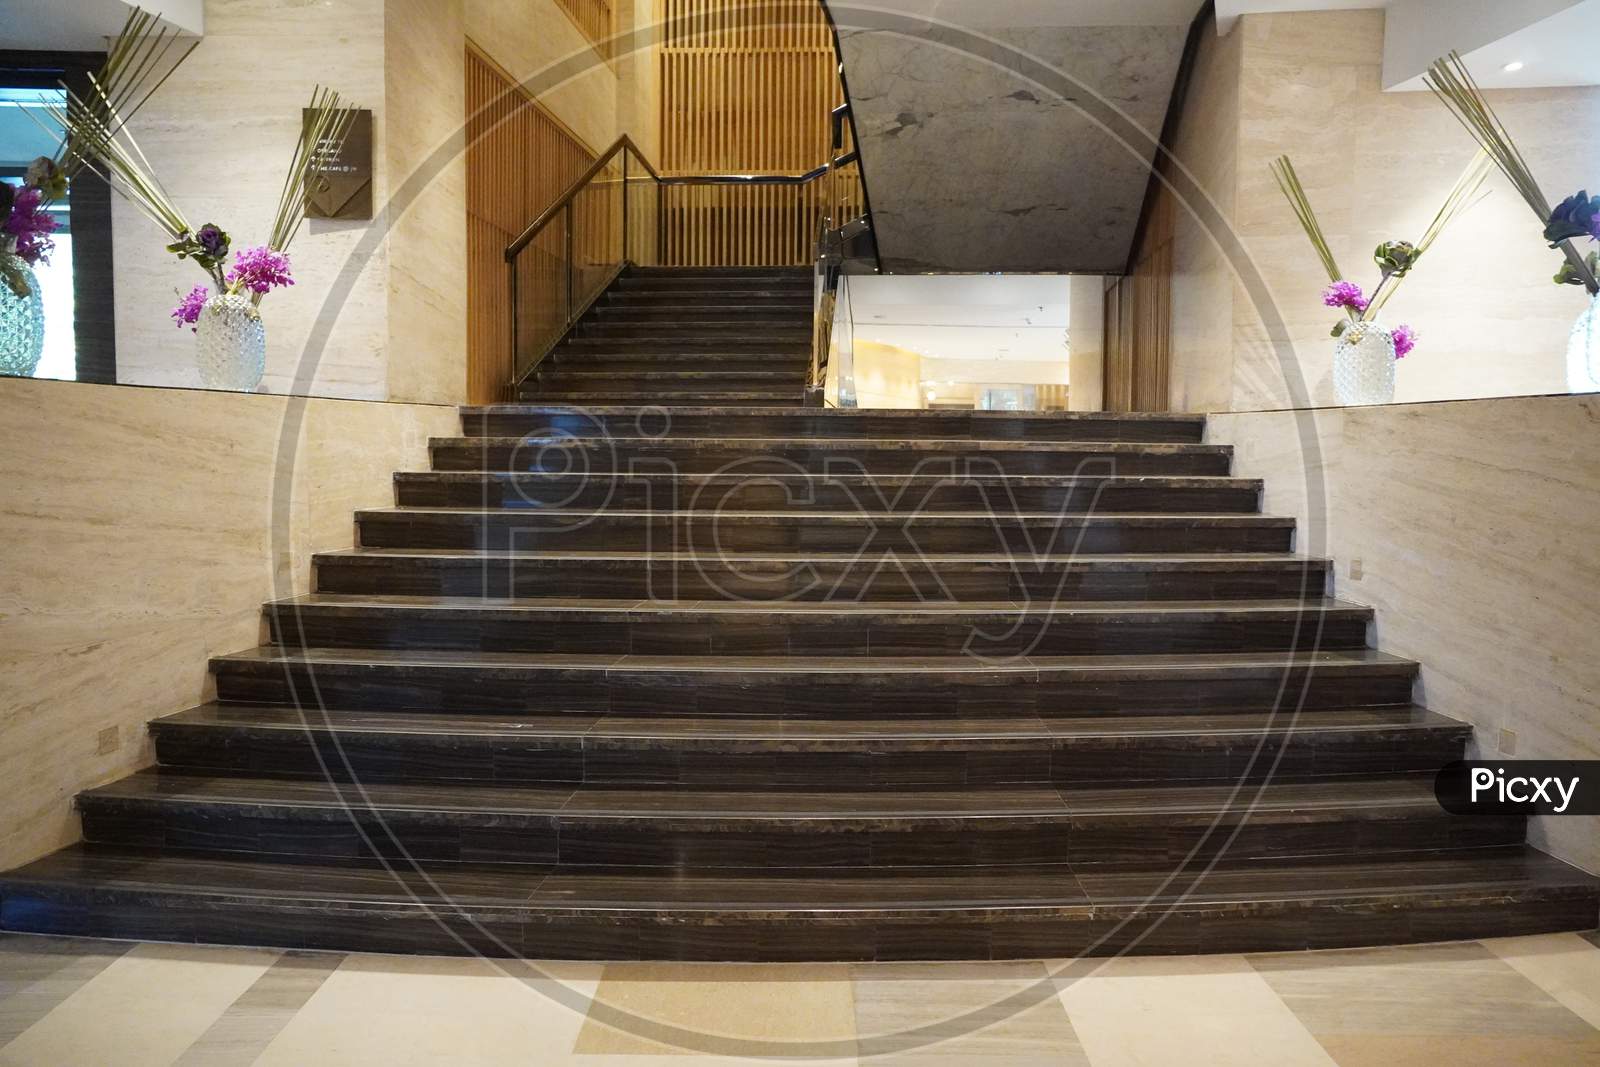 Chandigarh, India - November 2019: Luxurious Staircase With Marble Steps And Decorative And Ornamental Iron And Glass Railings. Elegant Historical Stairs In A Luxury Interior Inside A Hotel.